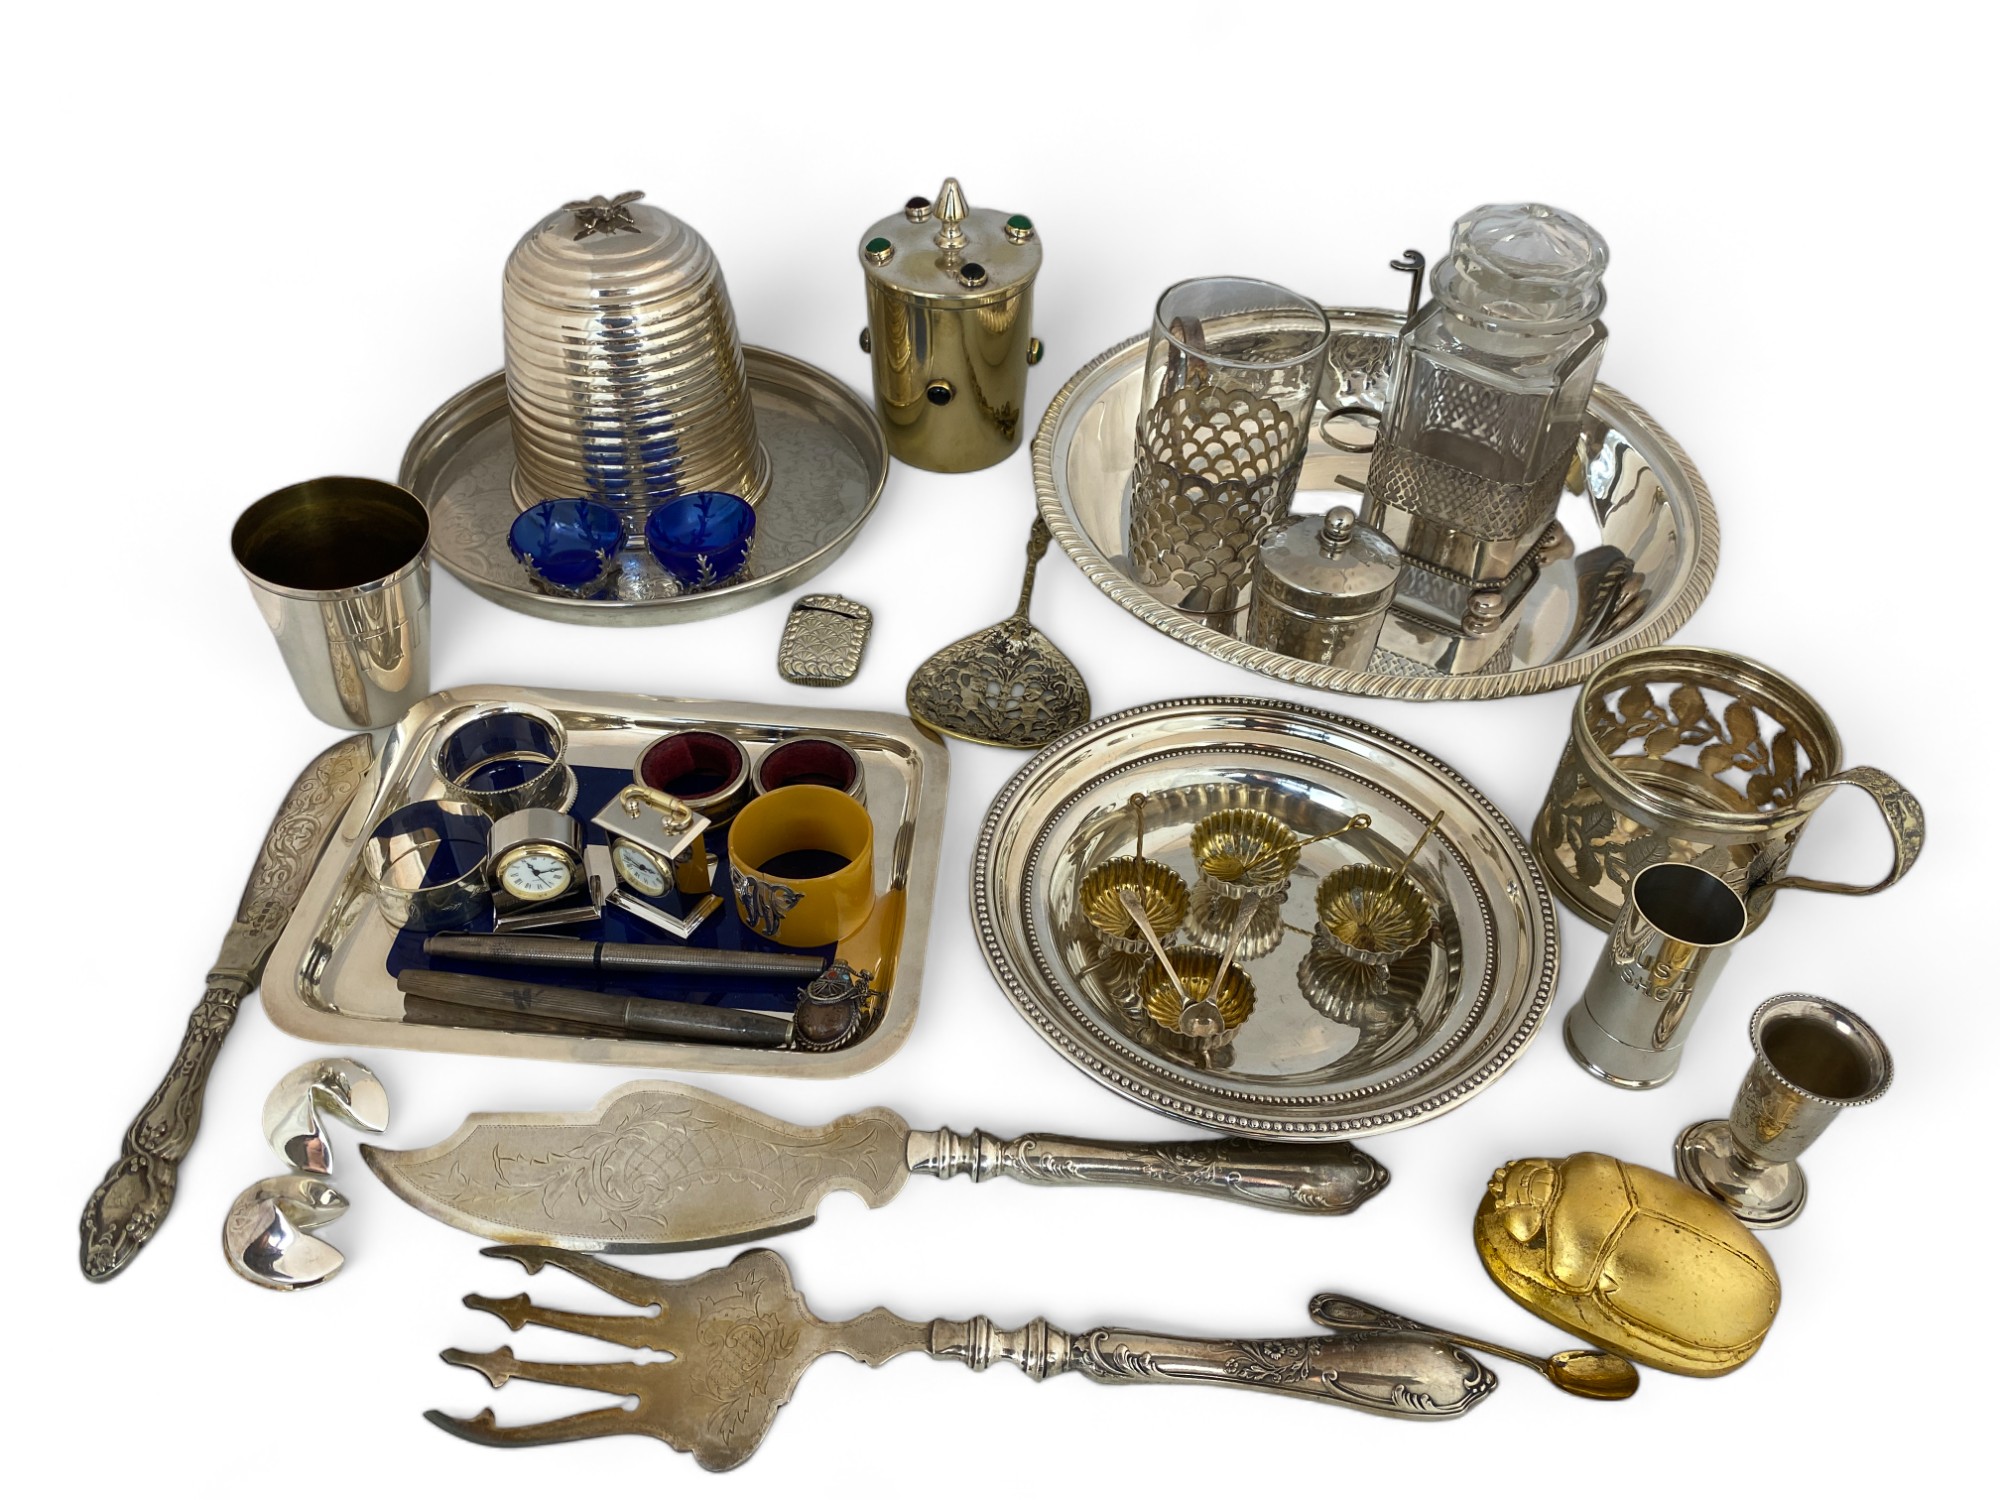 A group lot of silver plate and objects de vertu